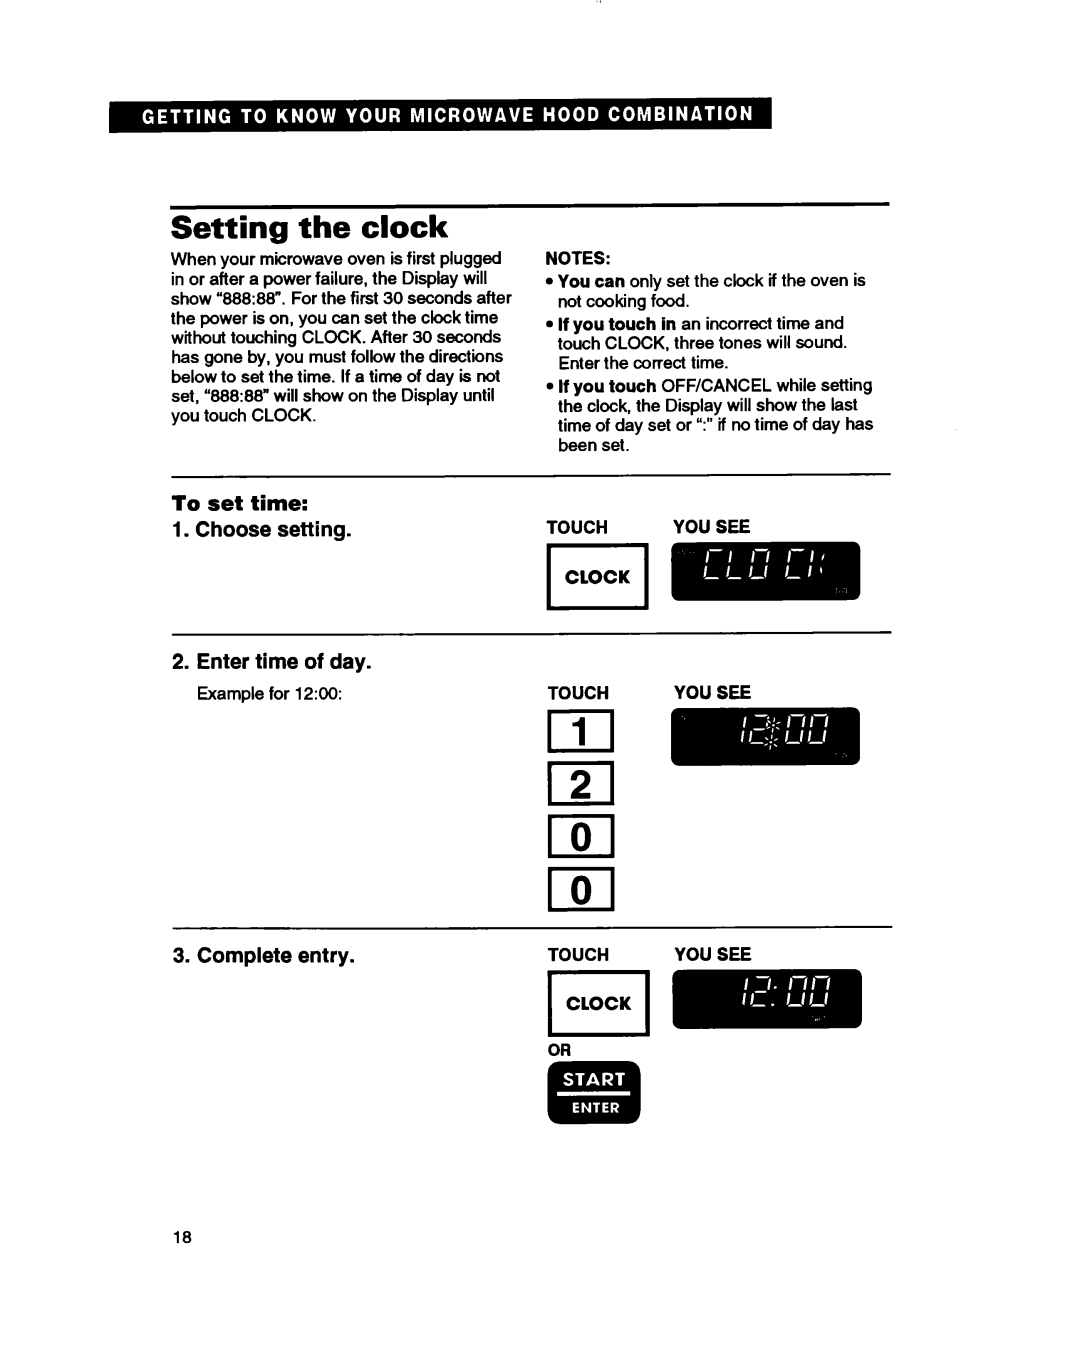 Whirlpool MH7110XB warranty Setting the clock, Choose setting, Enter time of day, Complete entry, To set time 